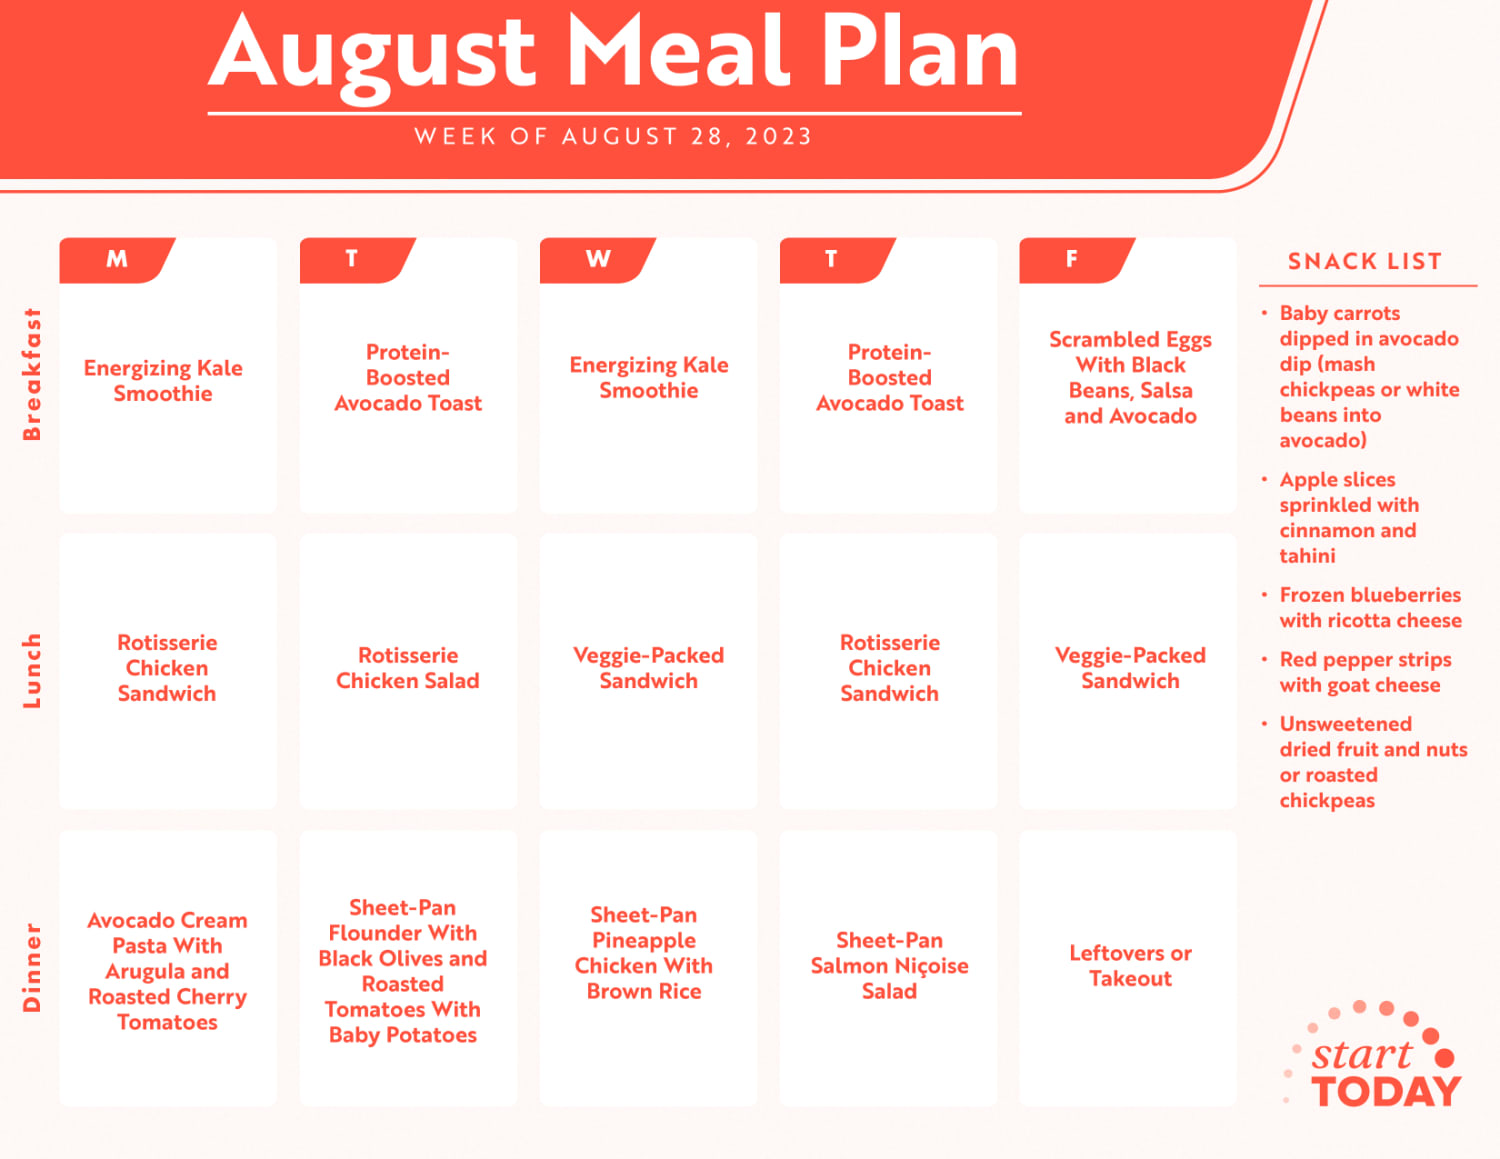 Energizing meal plans